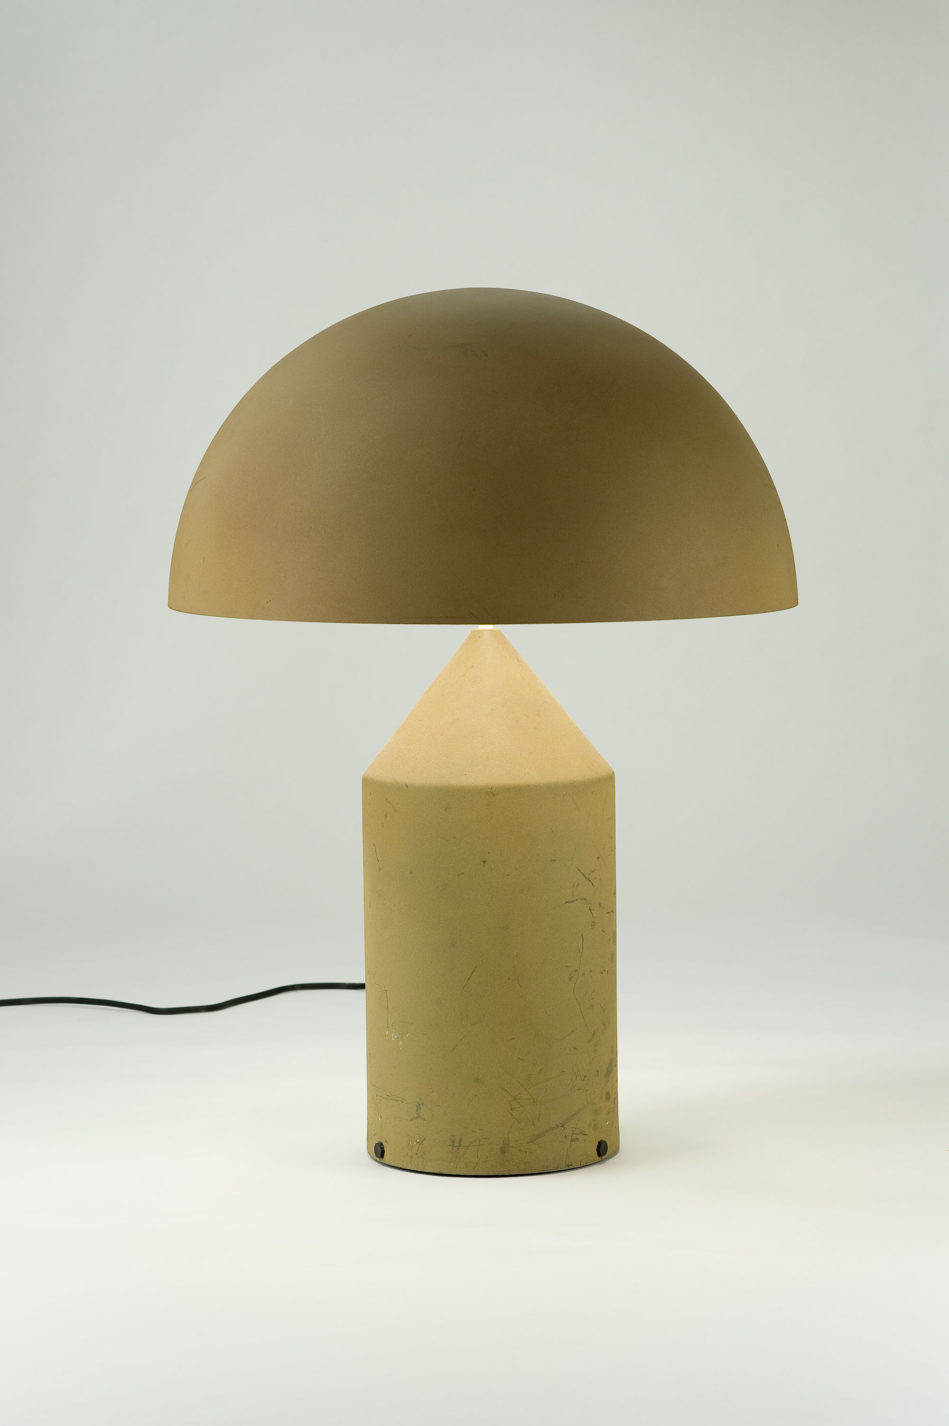 Tan table lamp with a cylindrical base that tapers to a cone at the top, surmounted by a semispherical opaque shade.